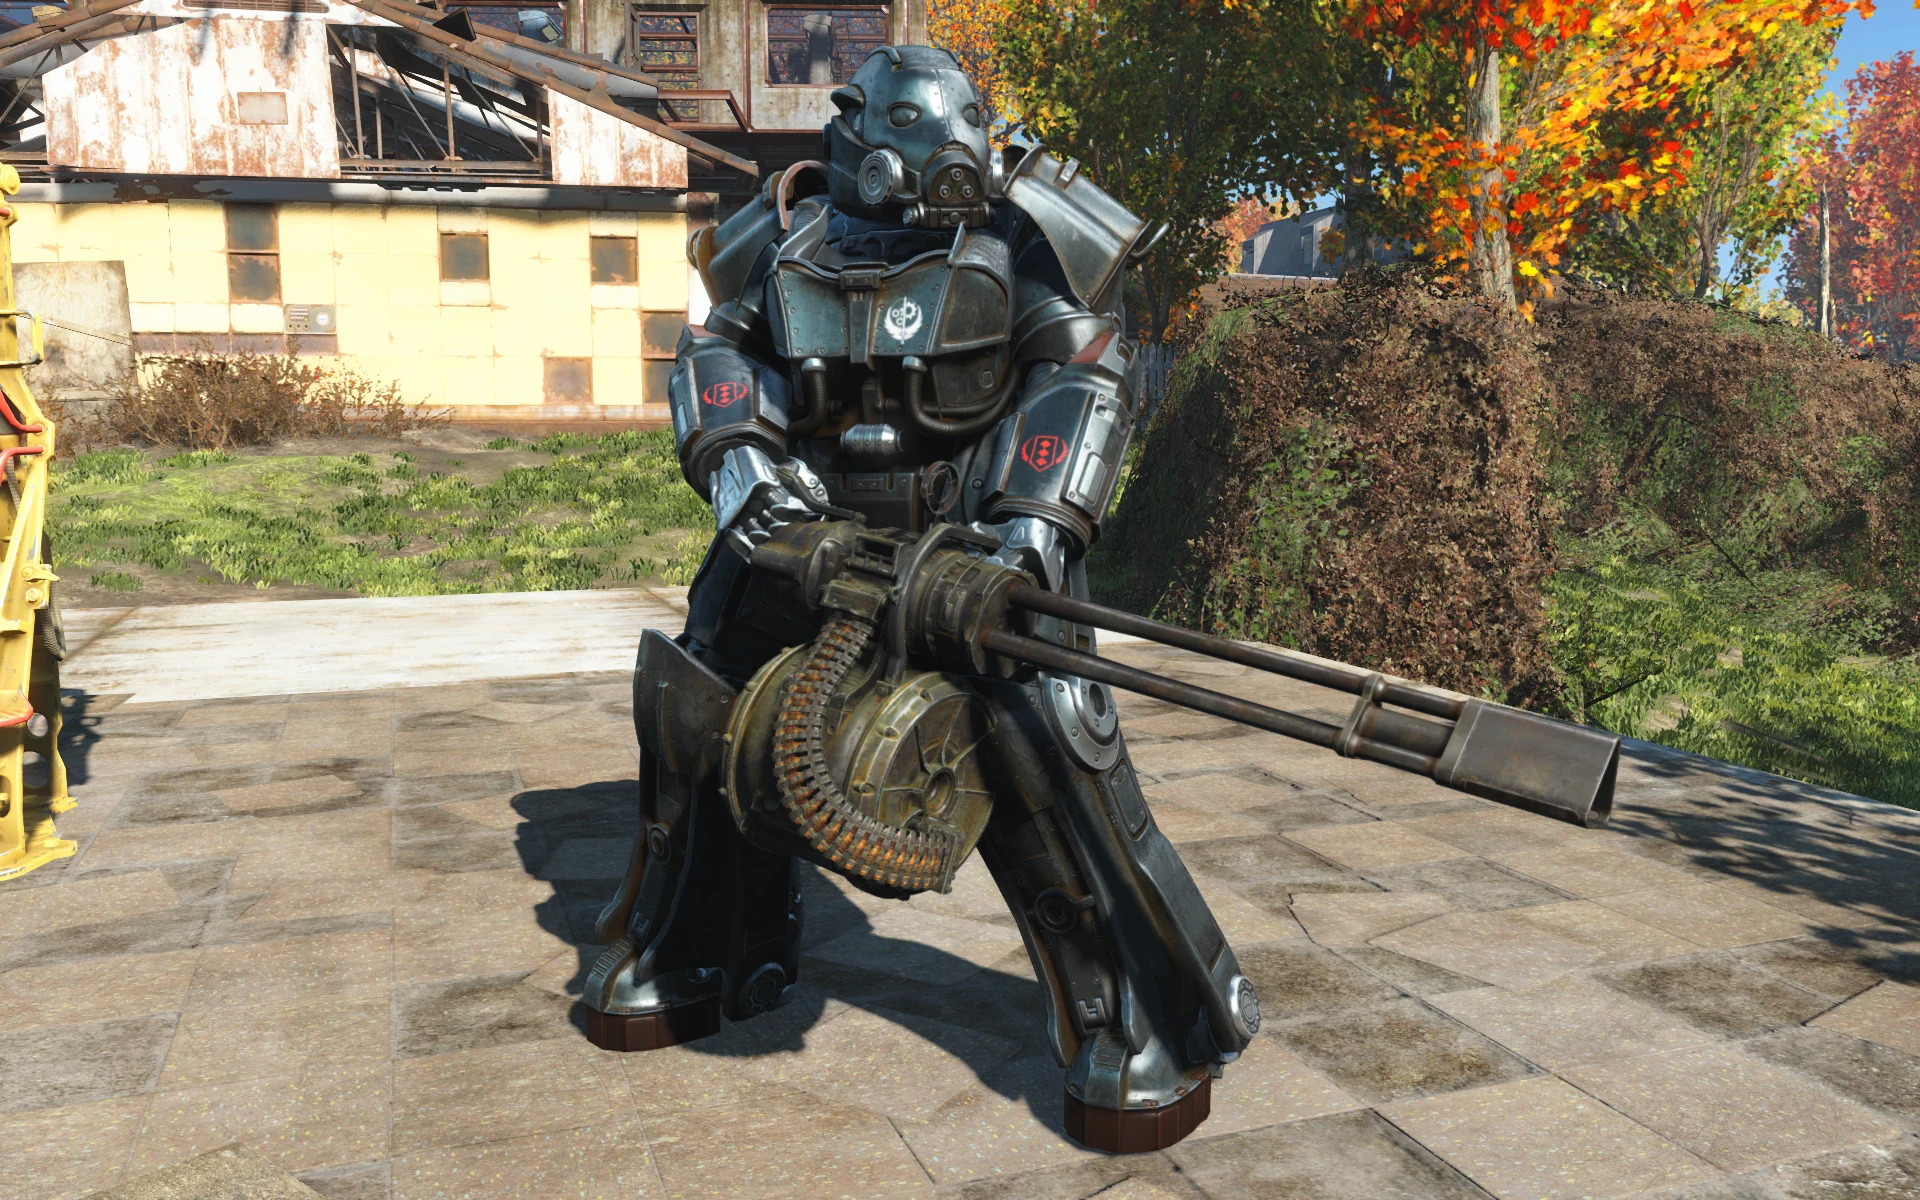 Bos X 03 Power Armor At Fallout 4 Nexus Mods And Community free images, dow...